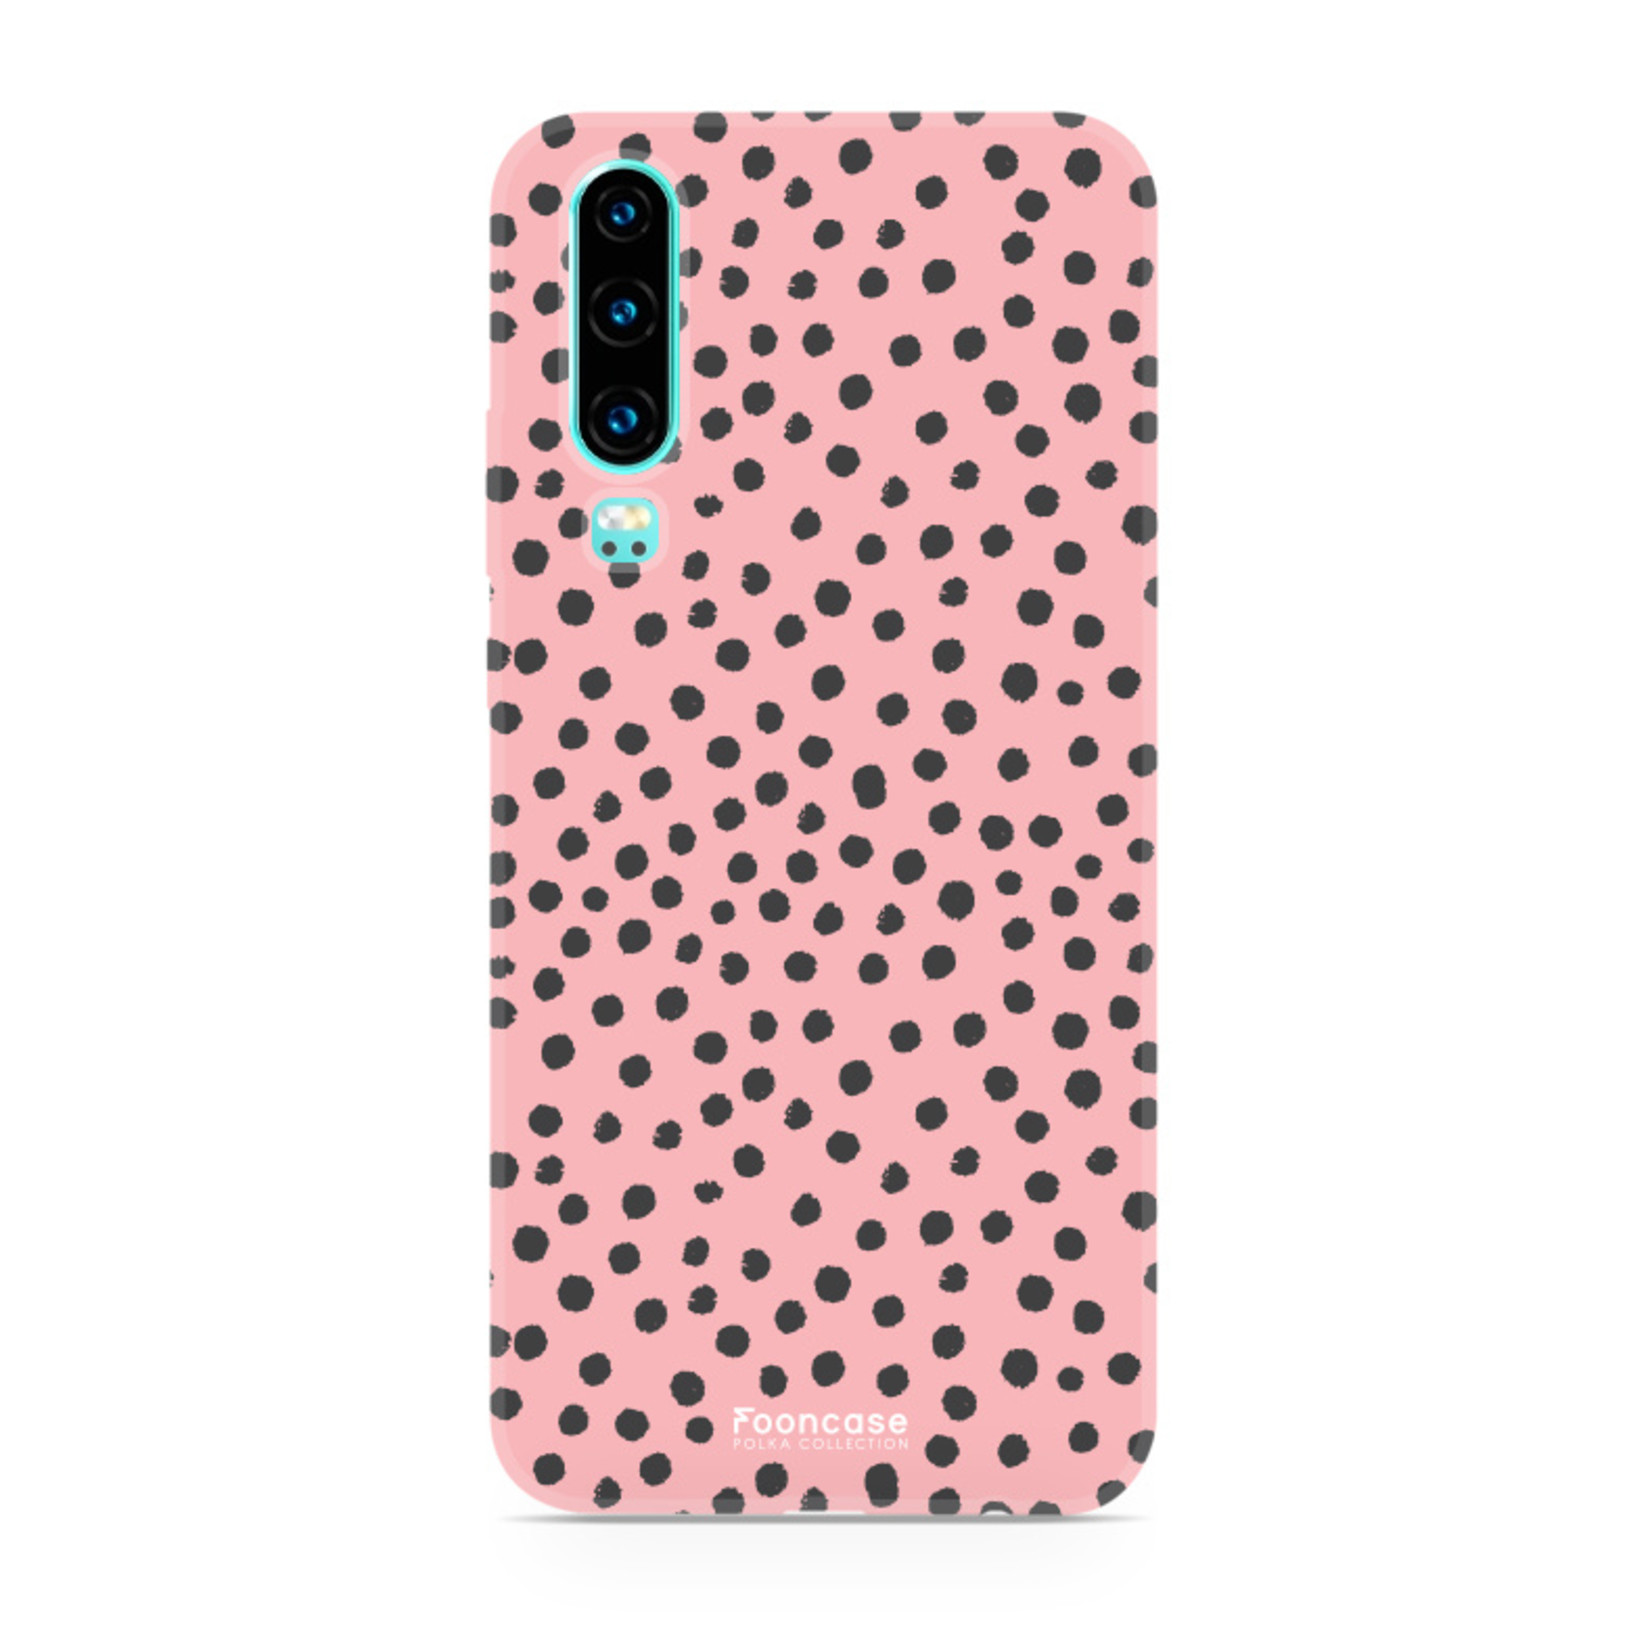 FOONCASE Huawei P30 - POLKA COLLECTION / Rosa